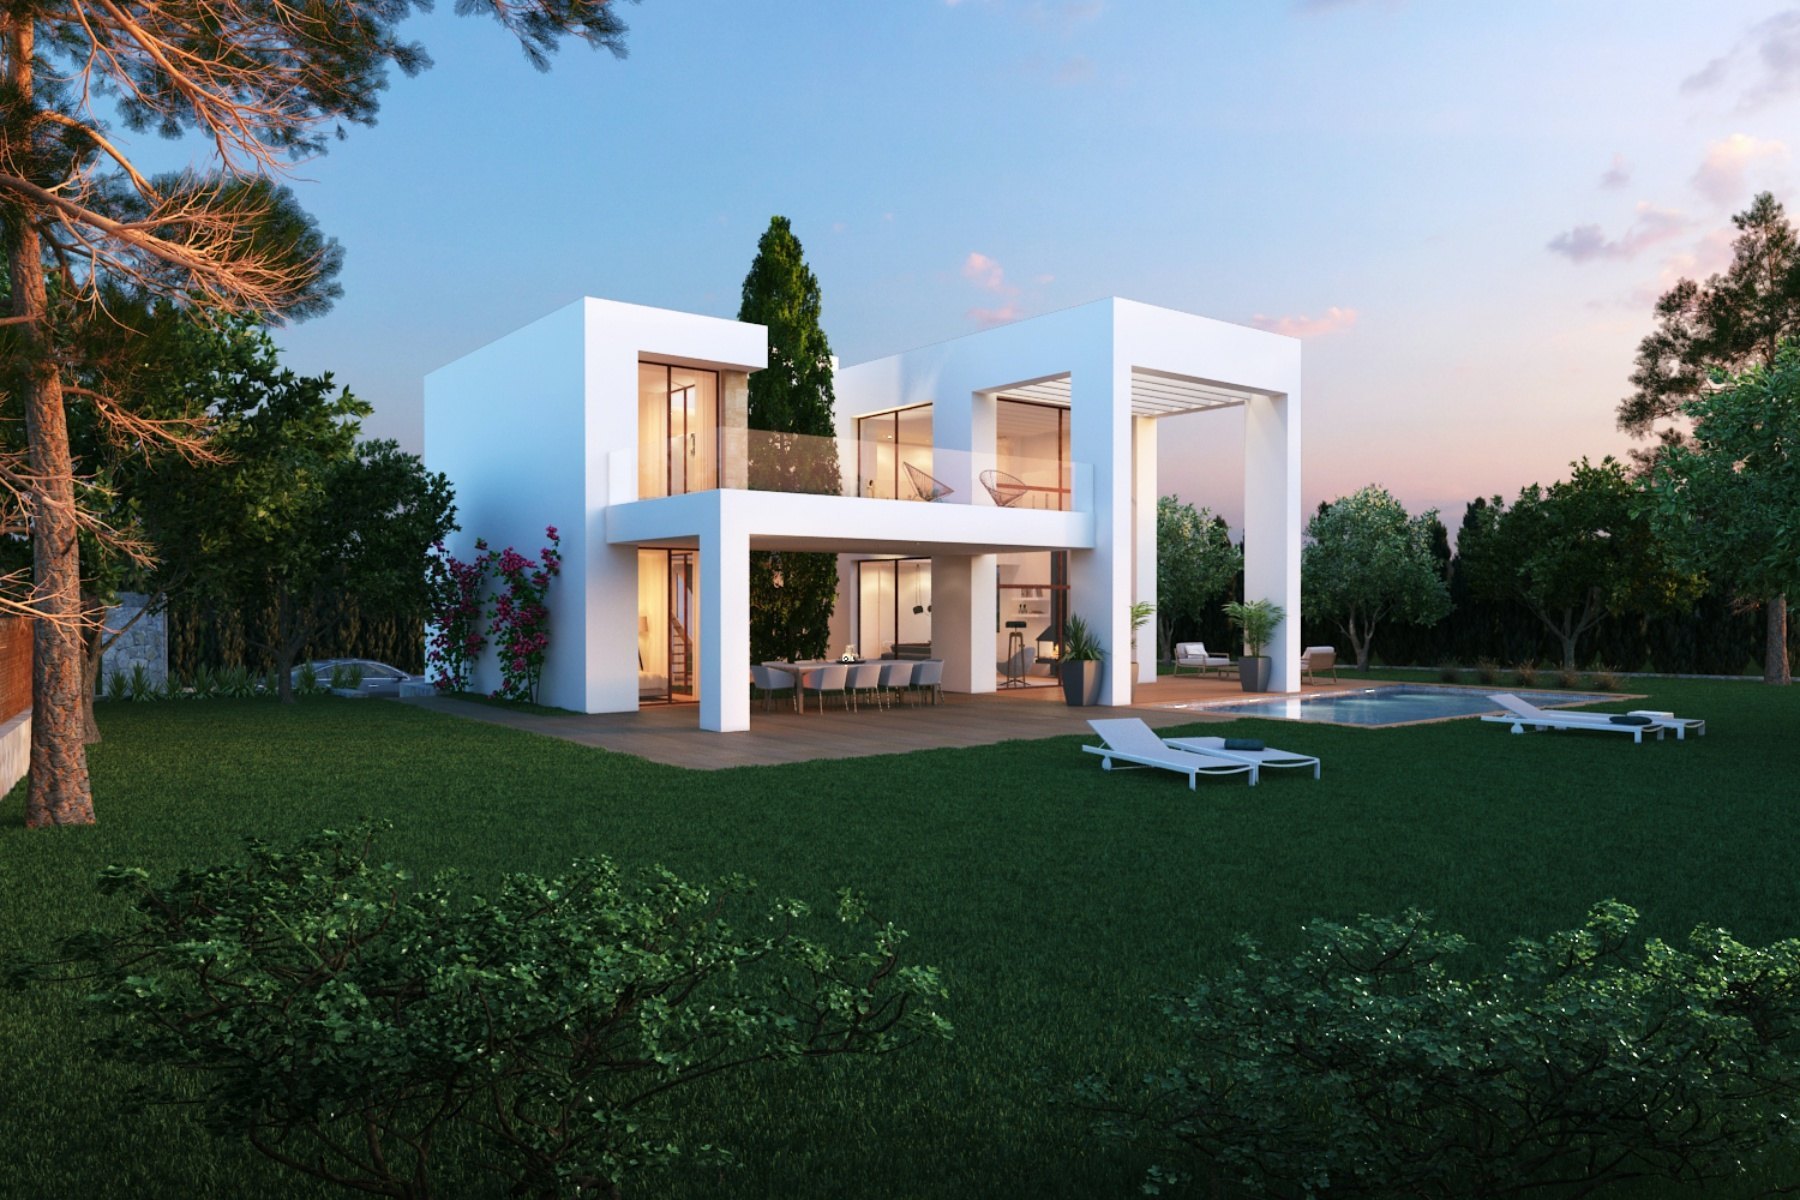 Four / Five Bedroom New Build Villas from €790,000